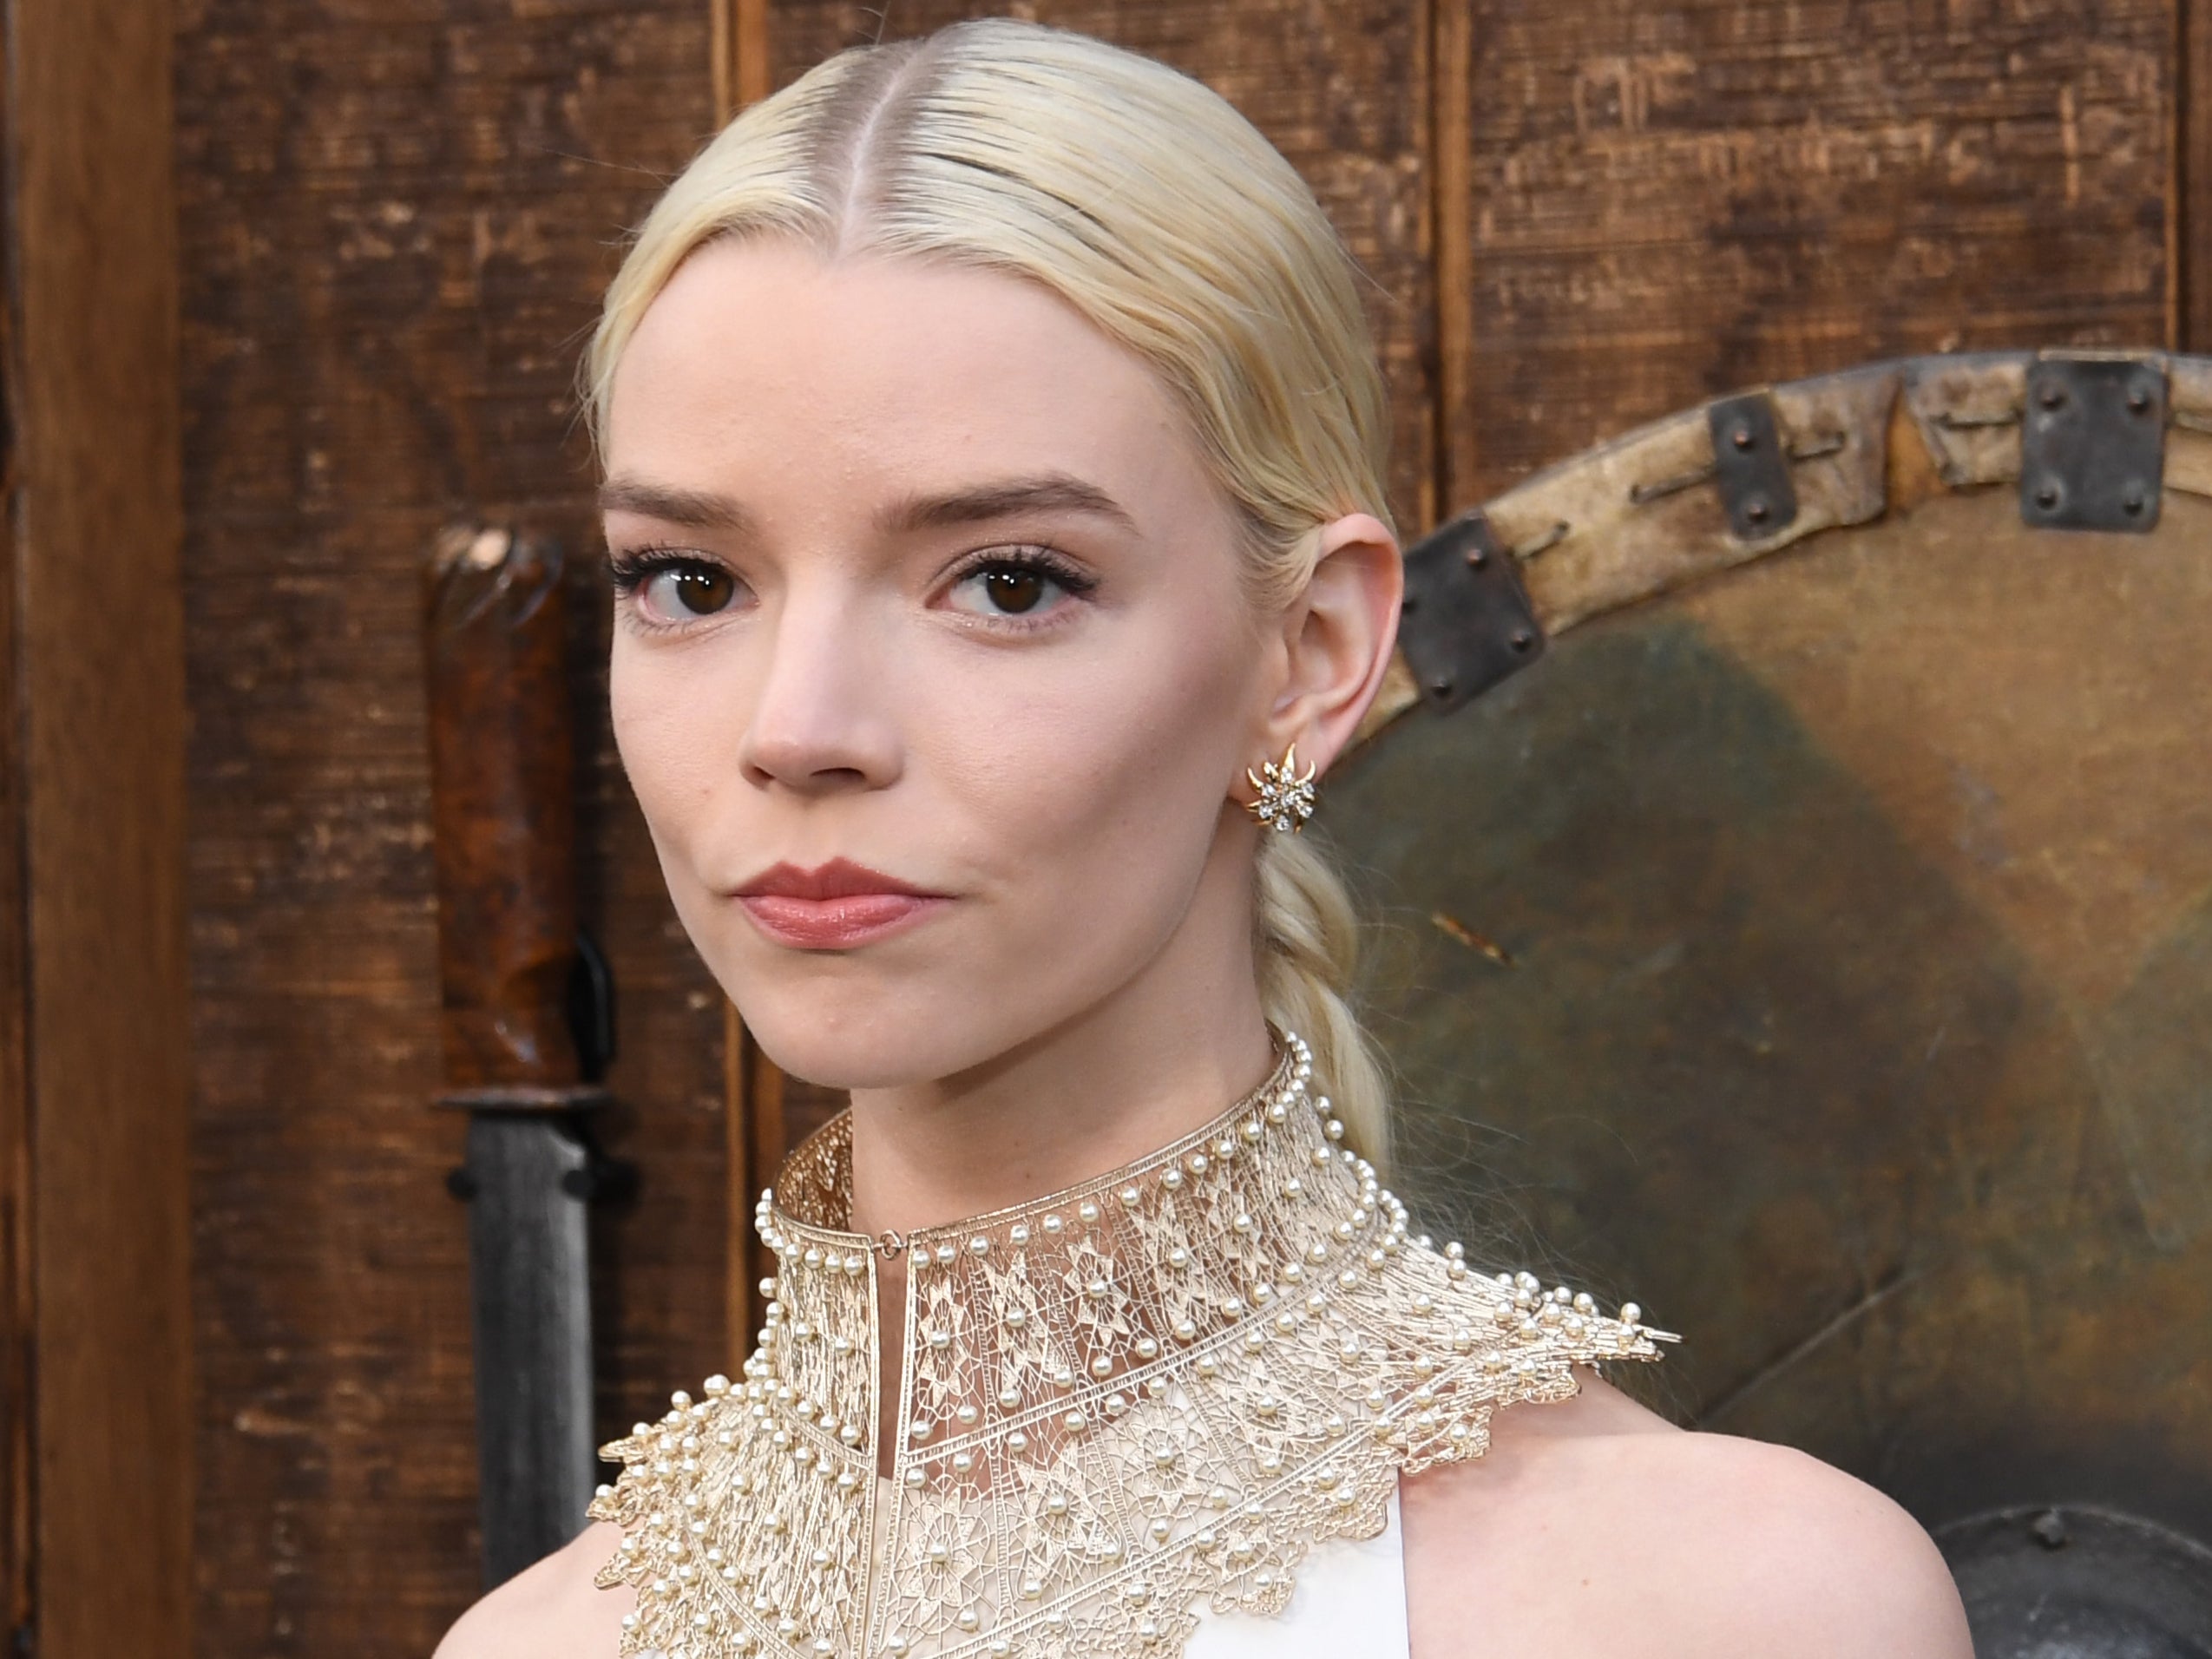 Anya Taylor-Joy Announces the End of Filming on Furiosa